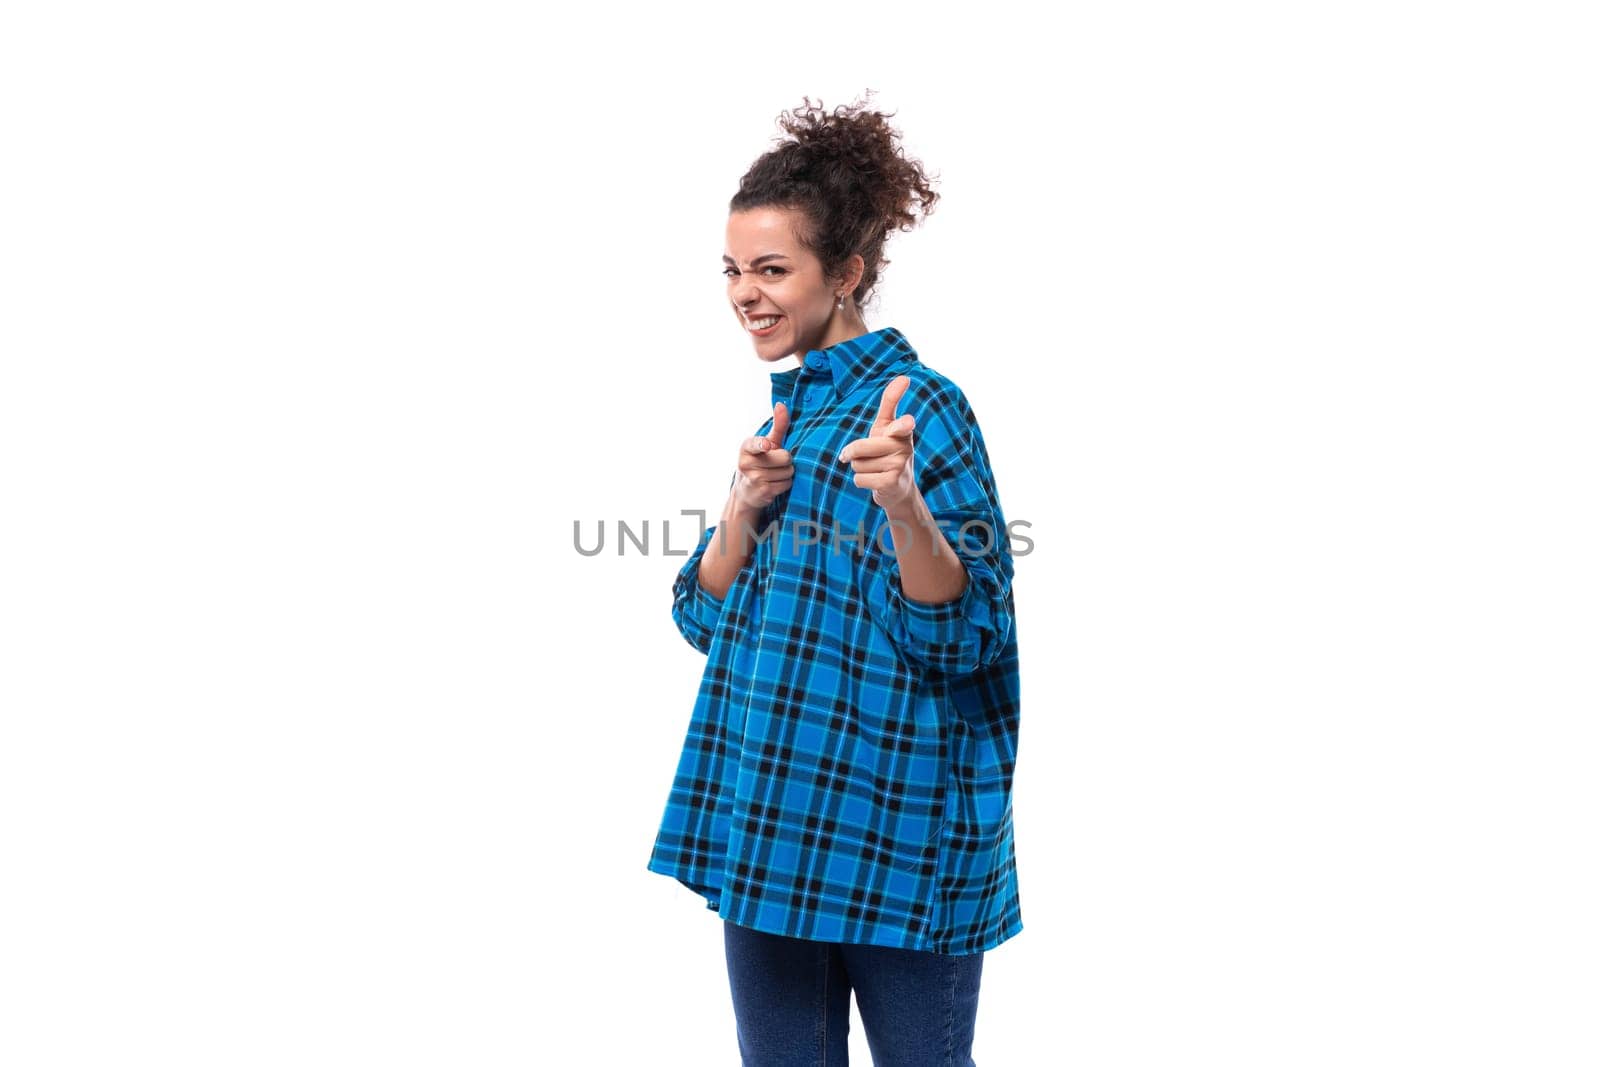 european young lady with curly ponytail hairstyle dressed in a blue shirt points her hand at the camera by TRMK